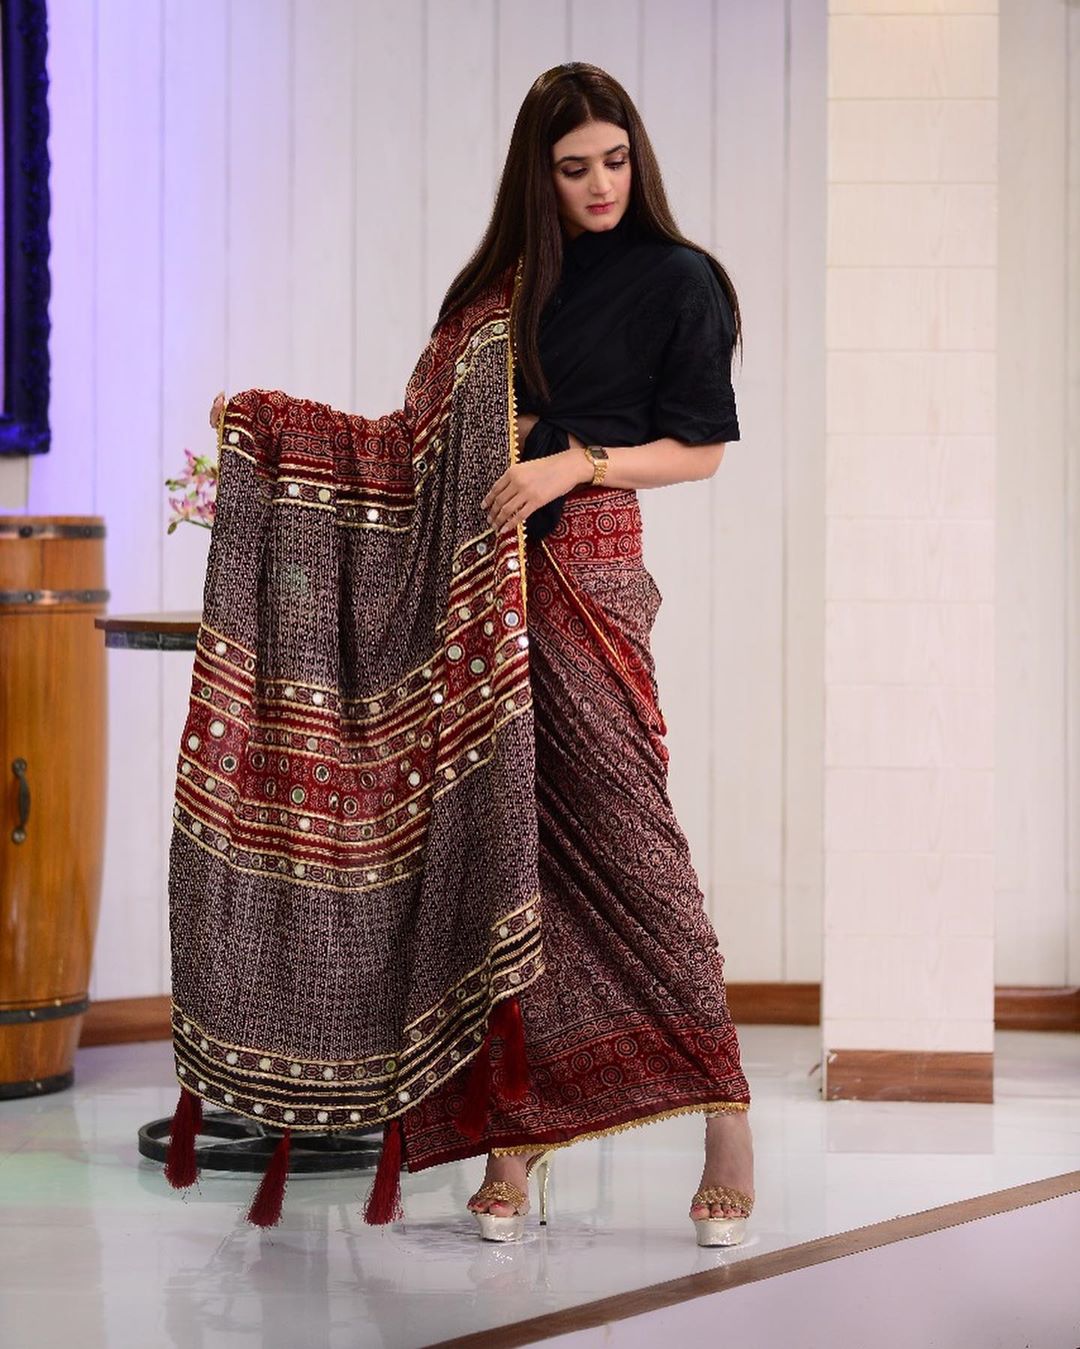 Beautiful Clicks with Different Look of Hira Mani in Saree